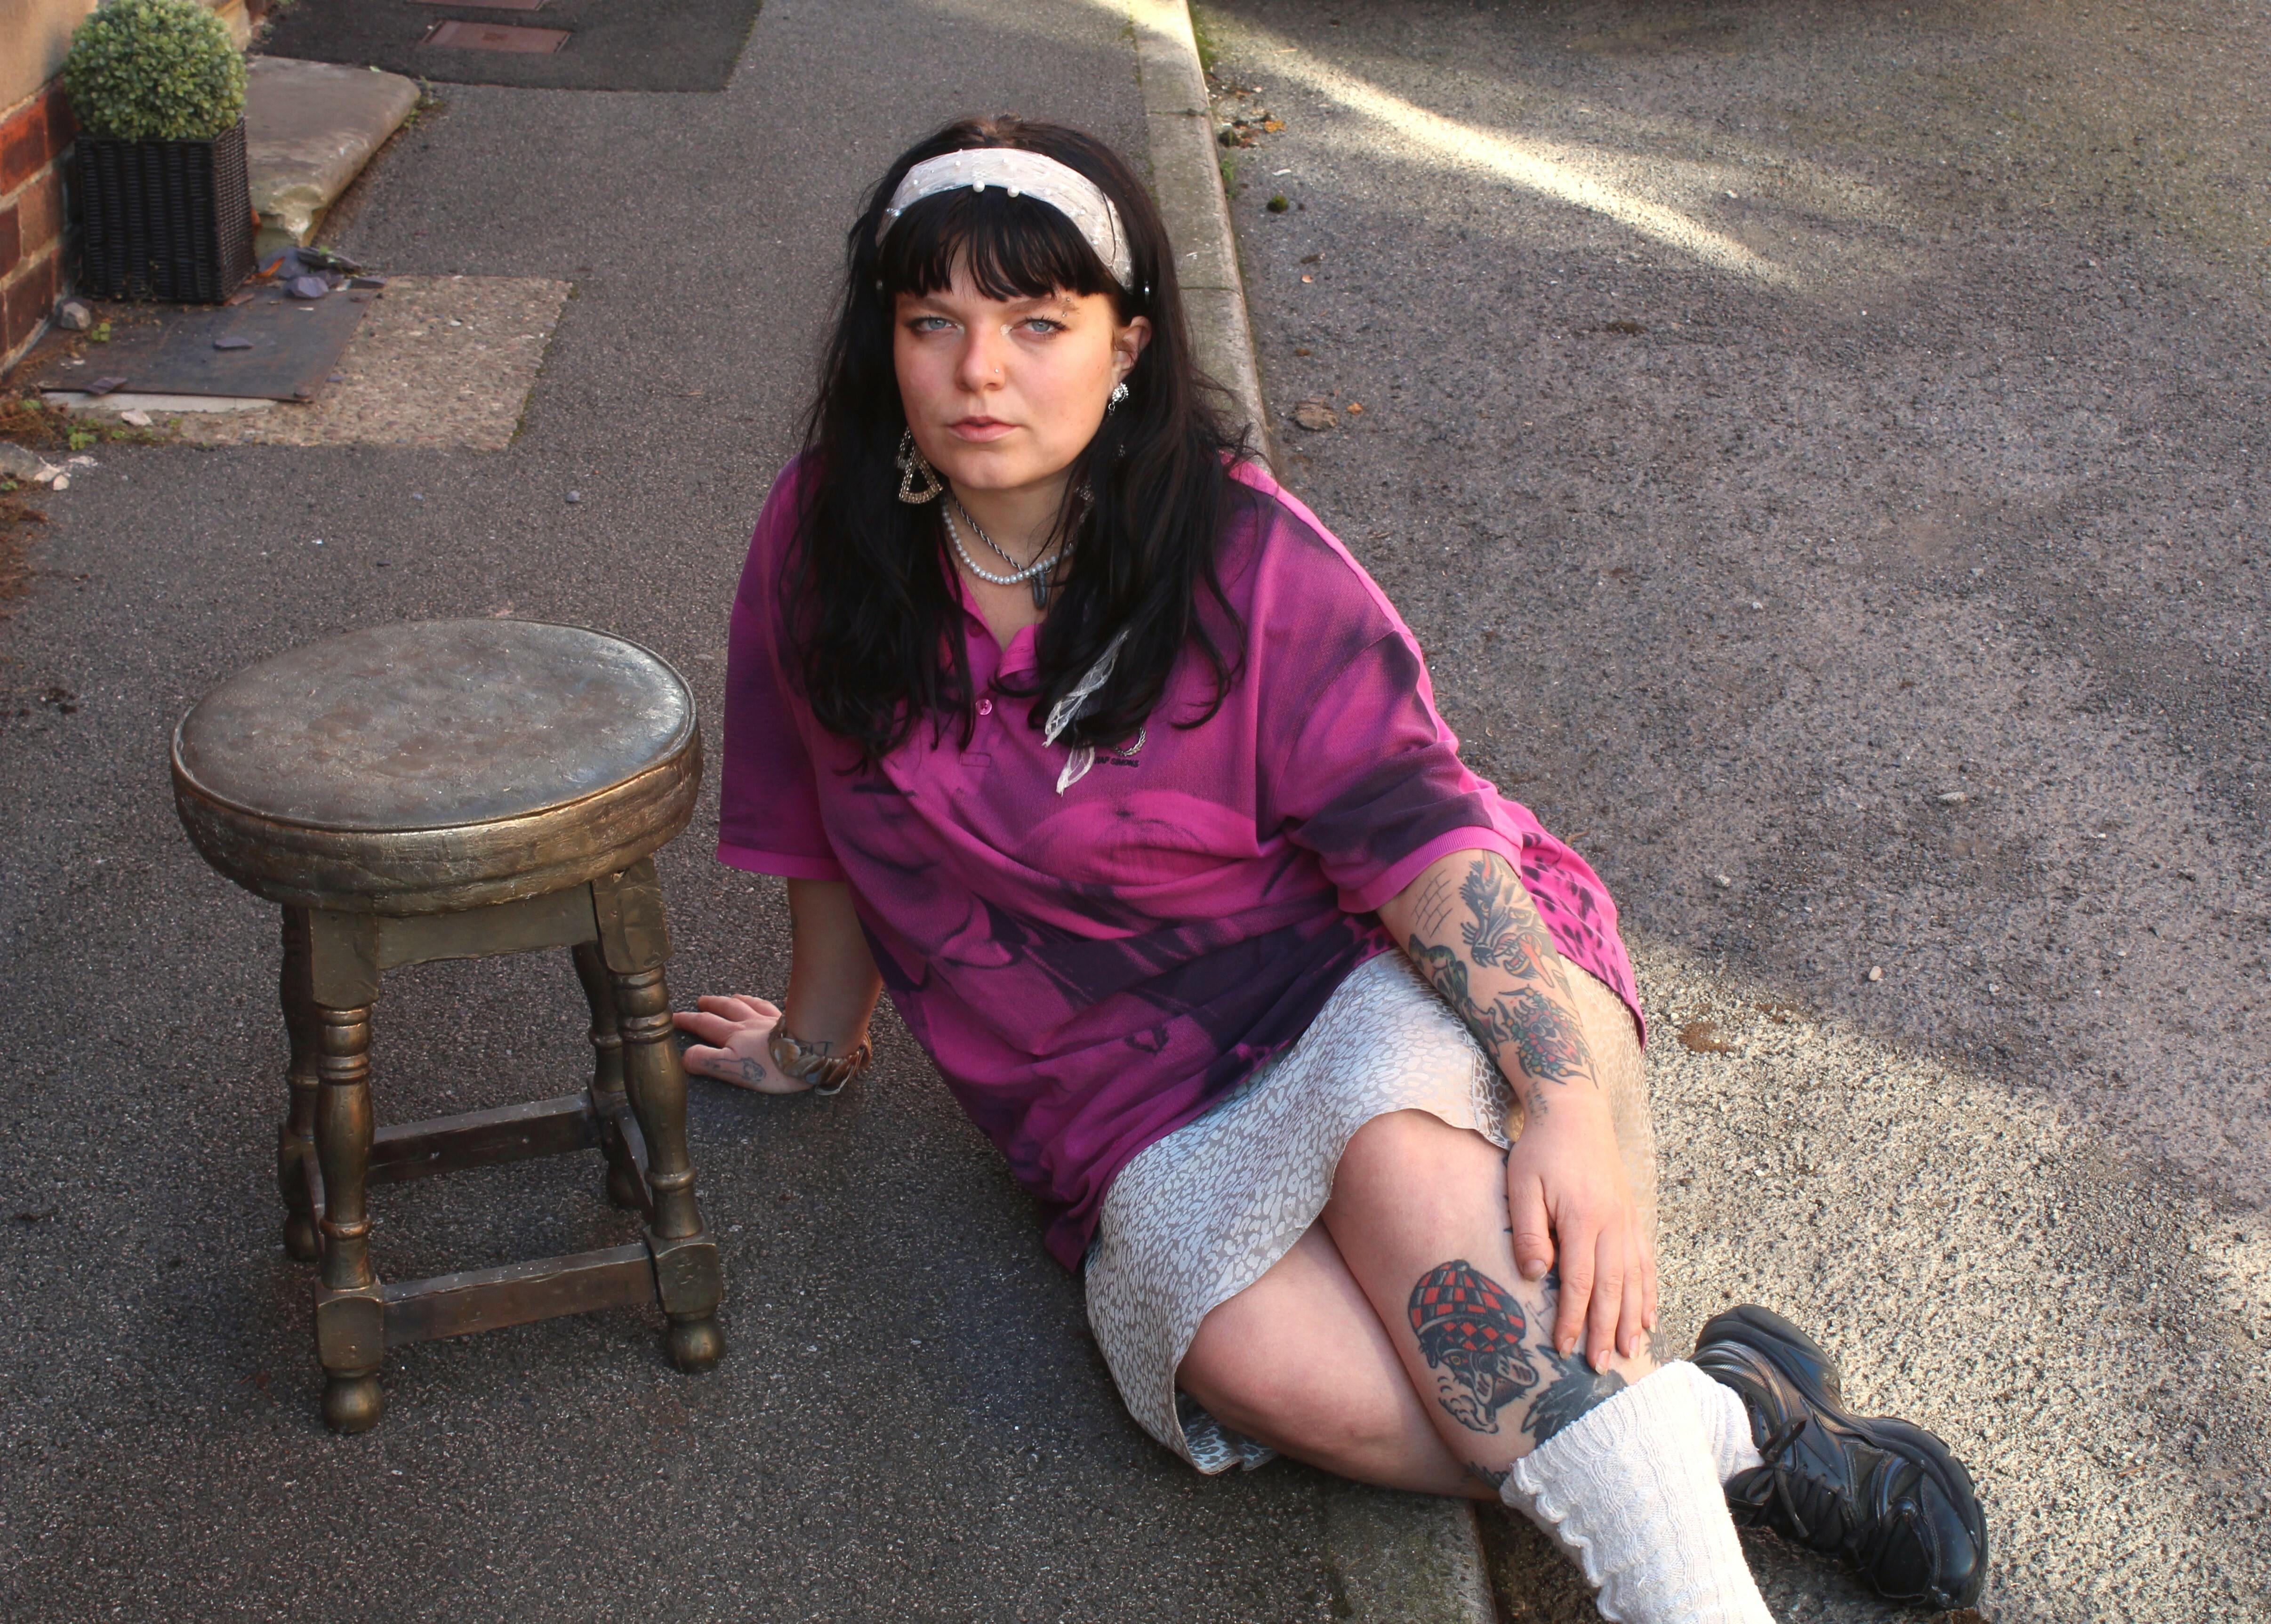 A woman wearing a pink shirt and white skirt, sitting on the ground next to a wooden stool.